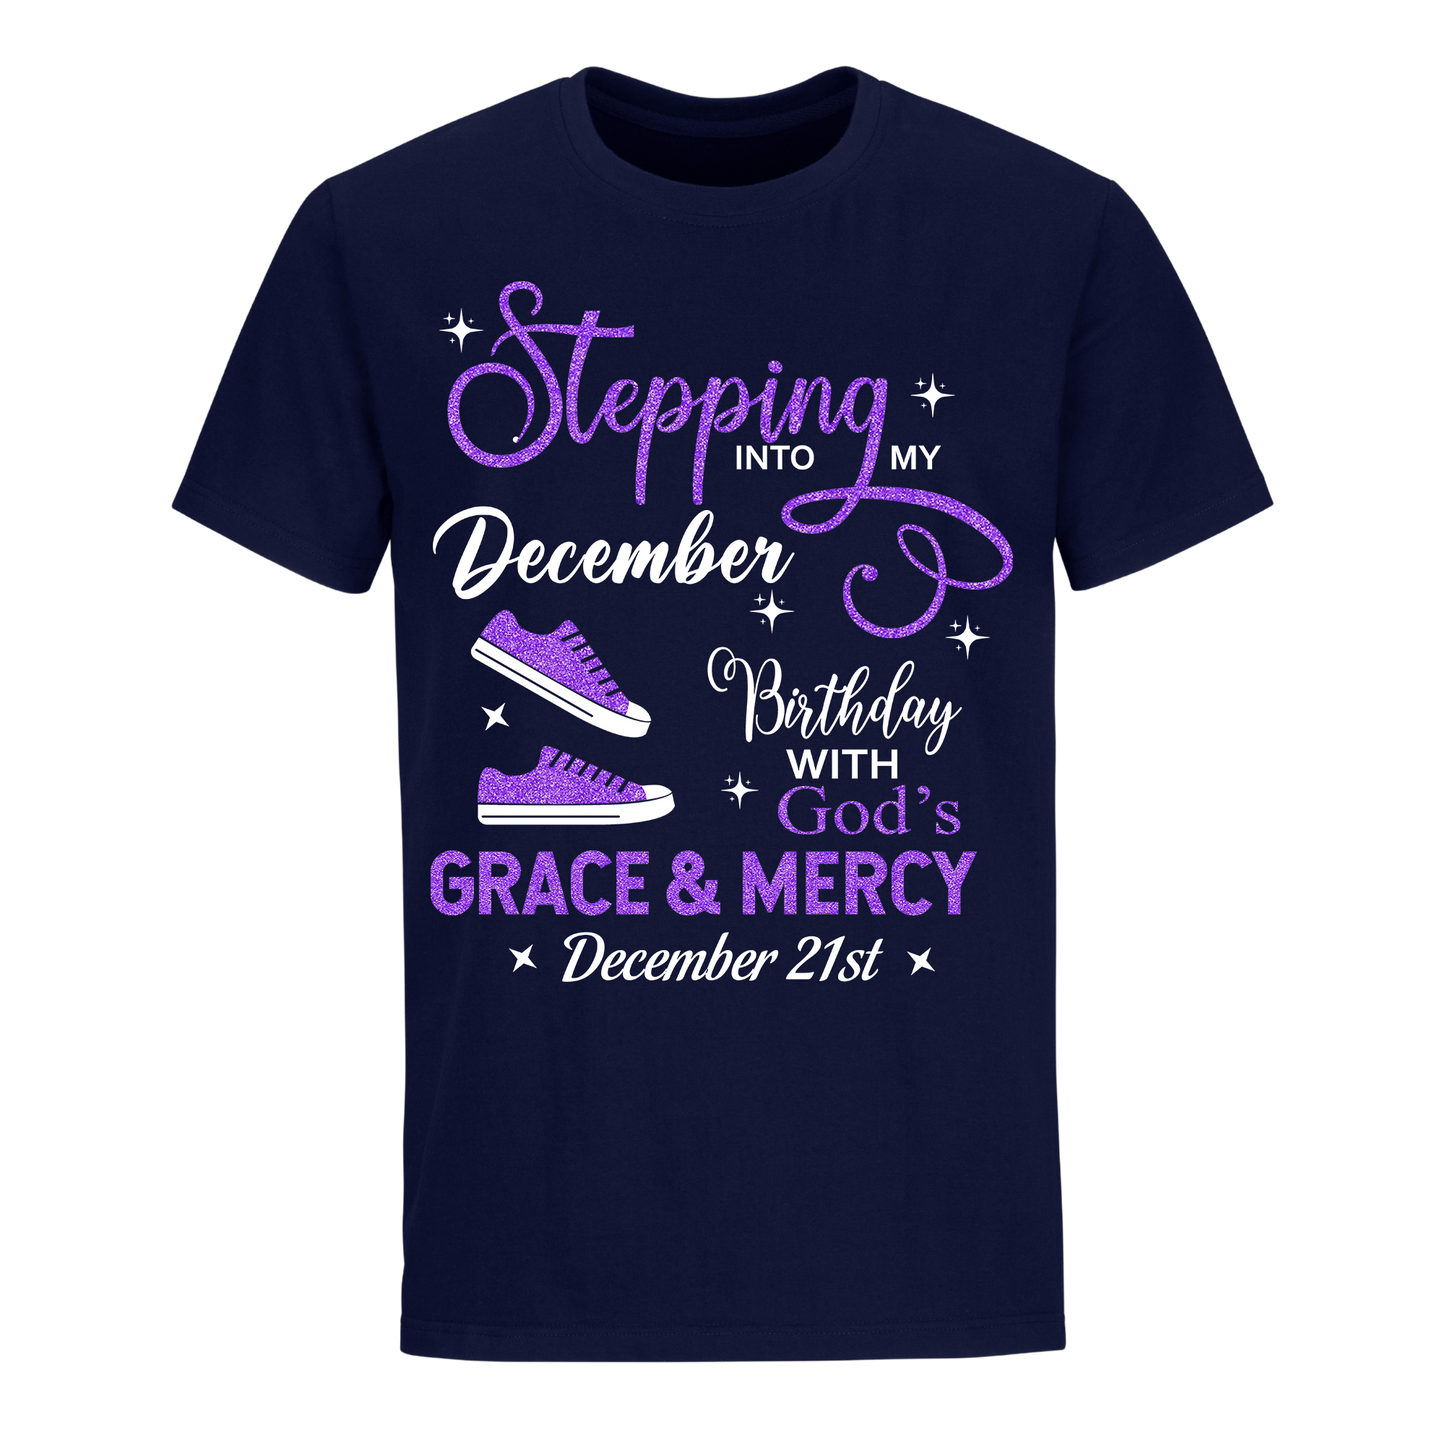 DECEMBER 21 GRACE AND MERCY